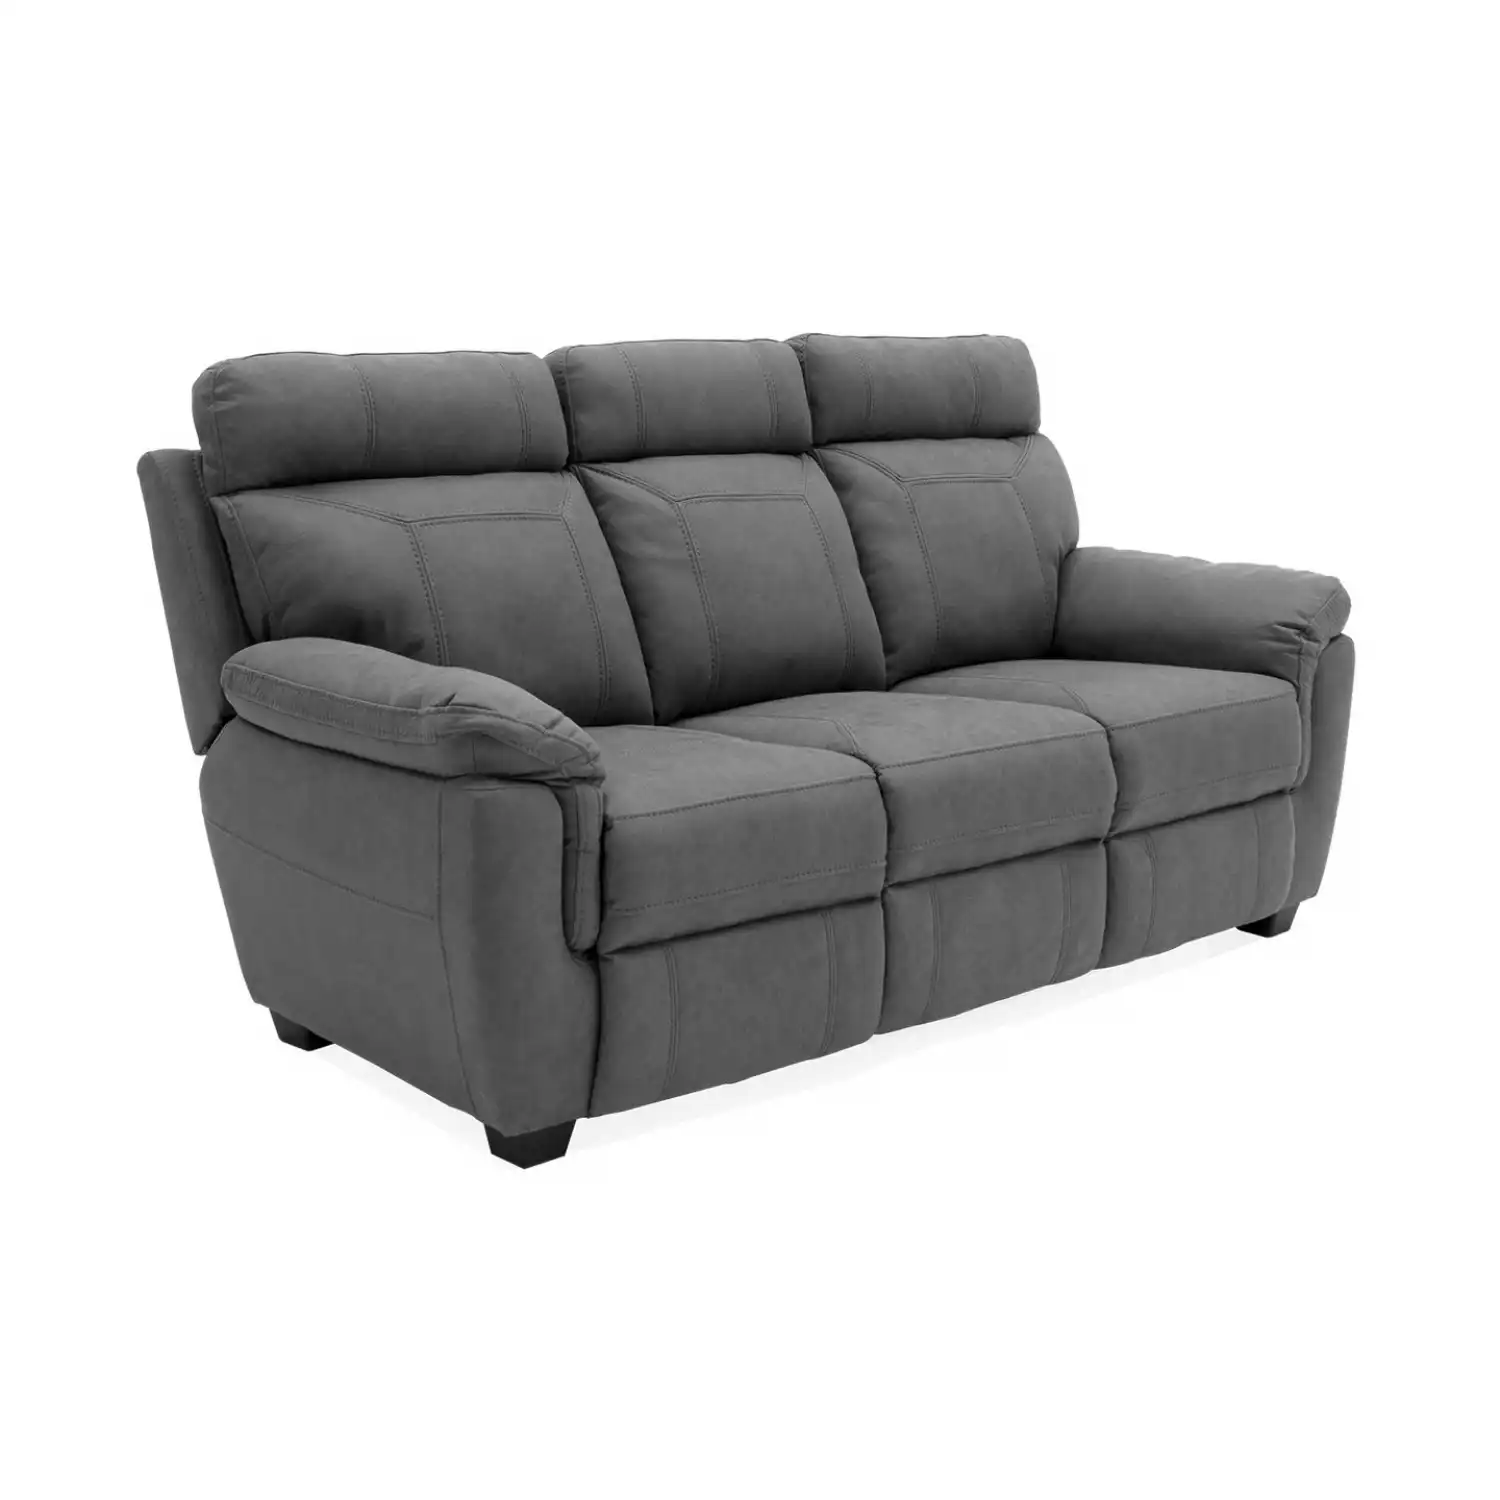 Grey Fabric 3 Seater Sofa with Contrast Stitching